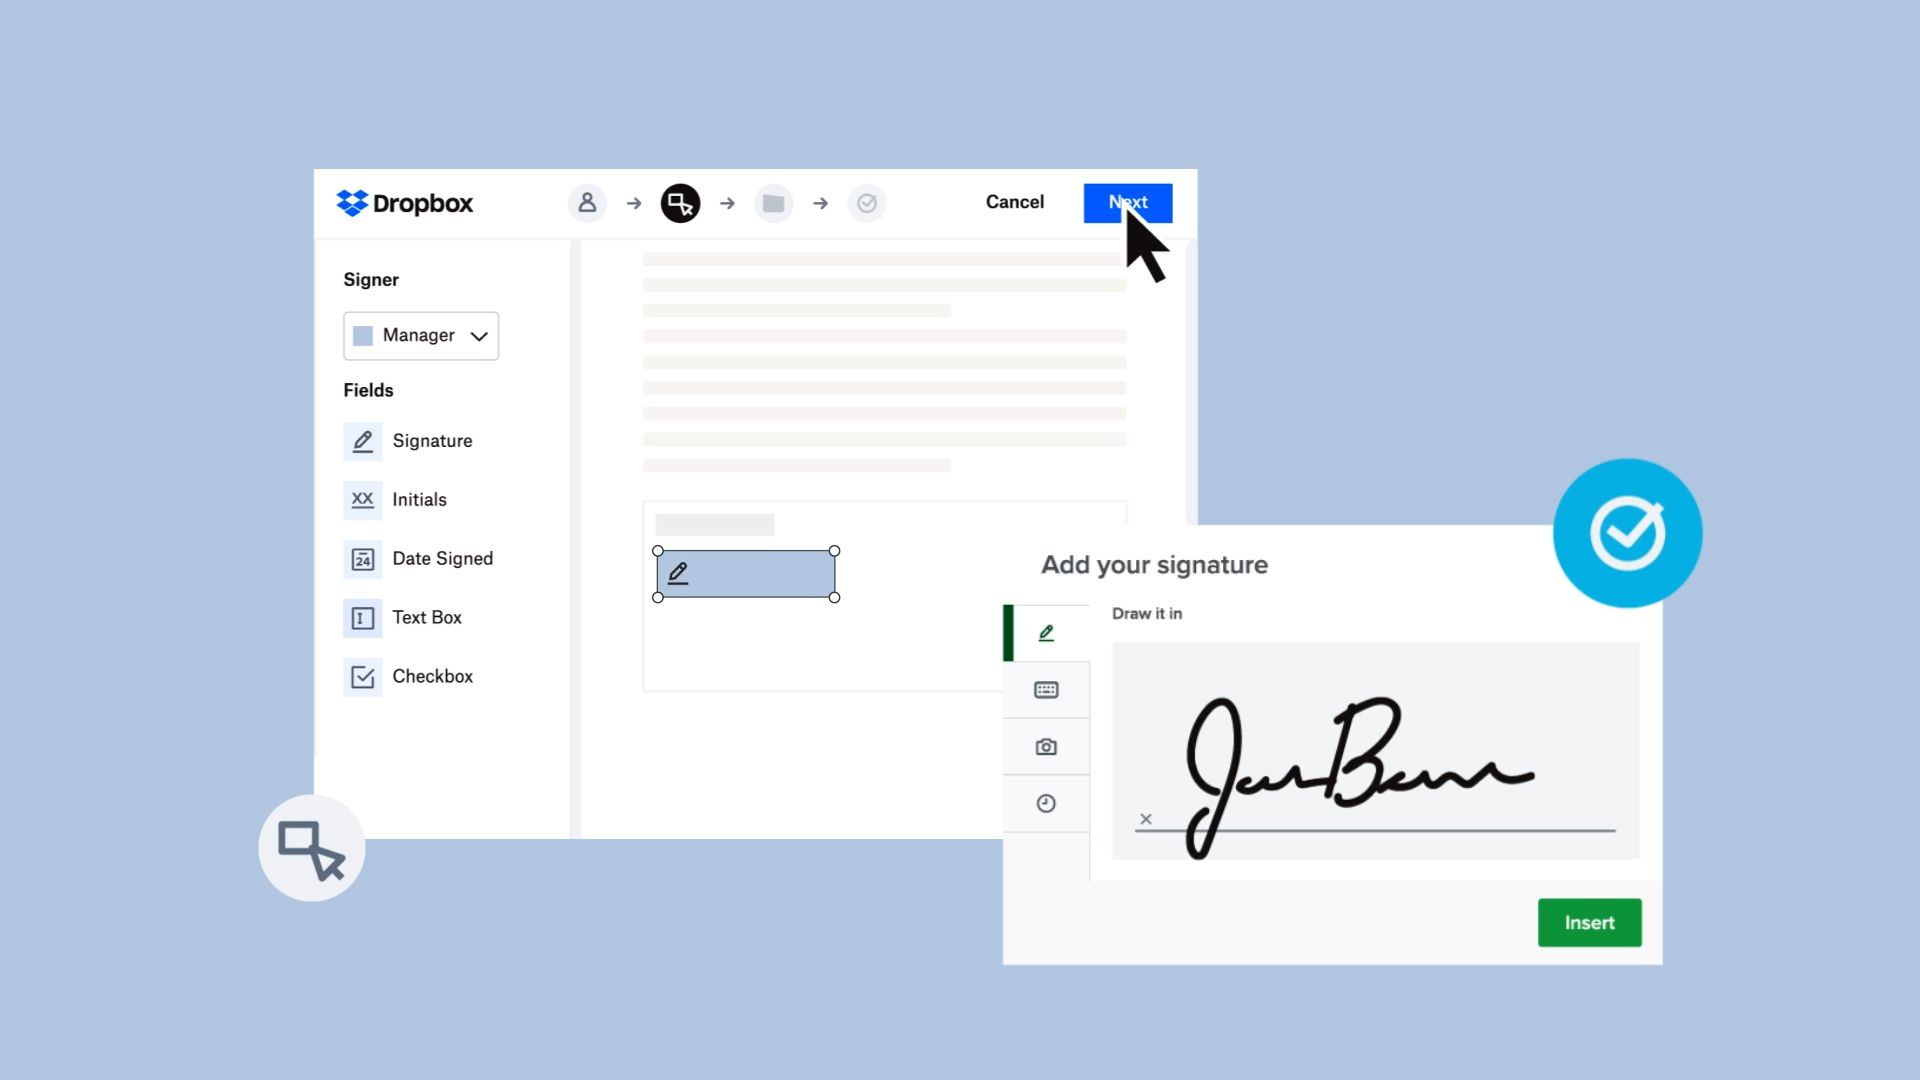 An e-signature is added to a document in Dropbox